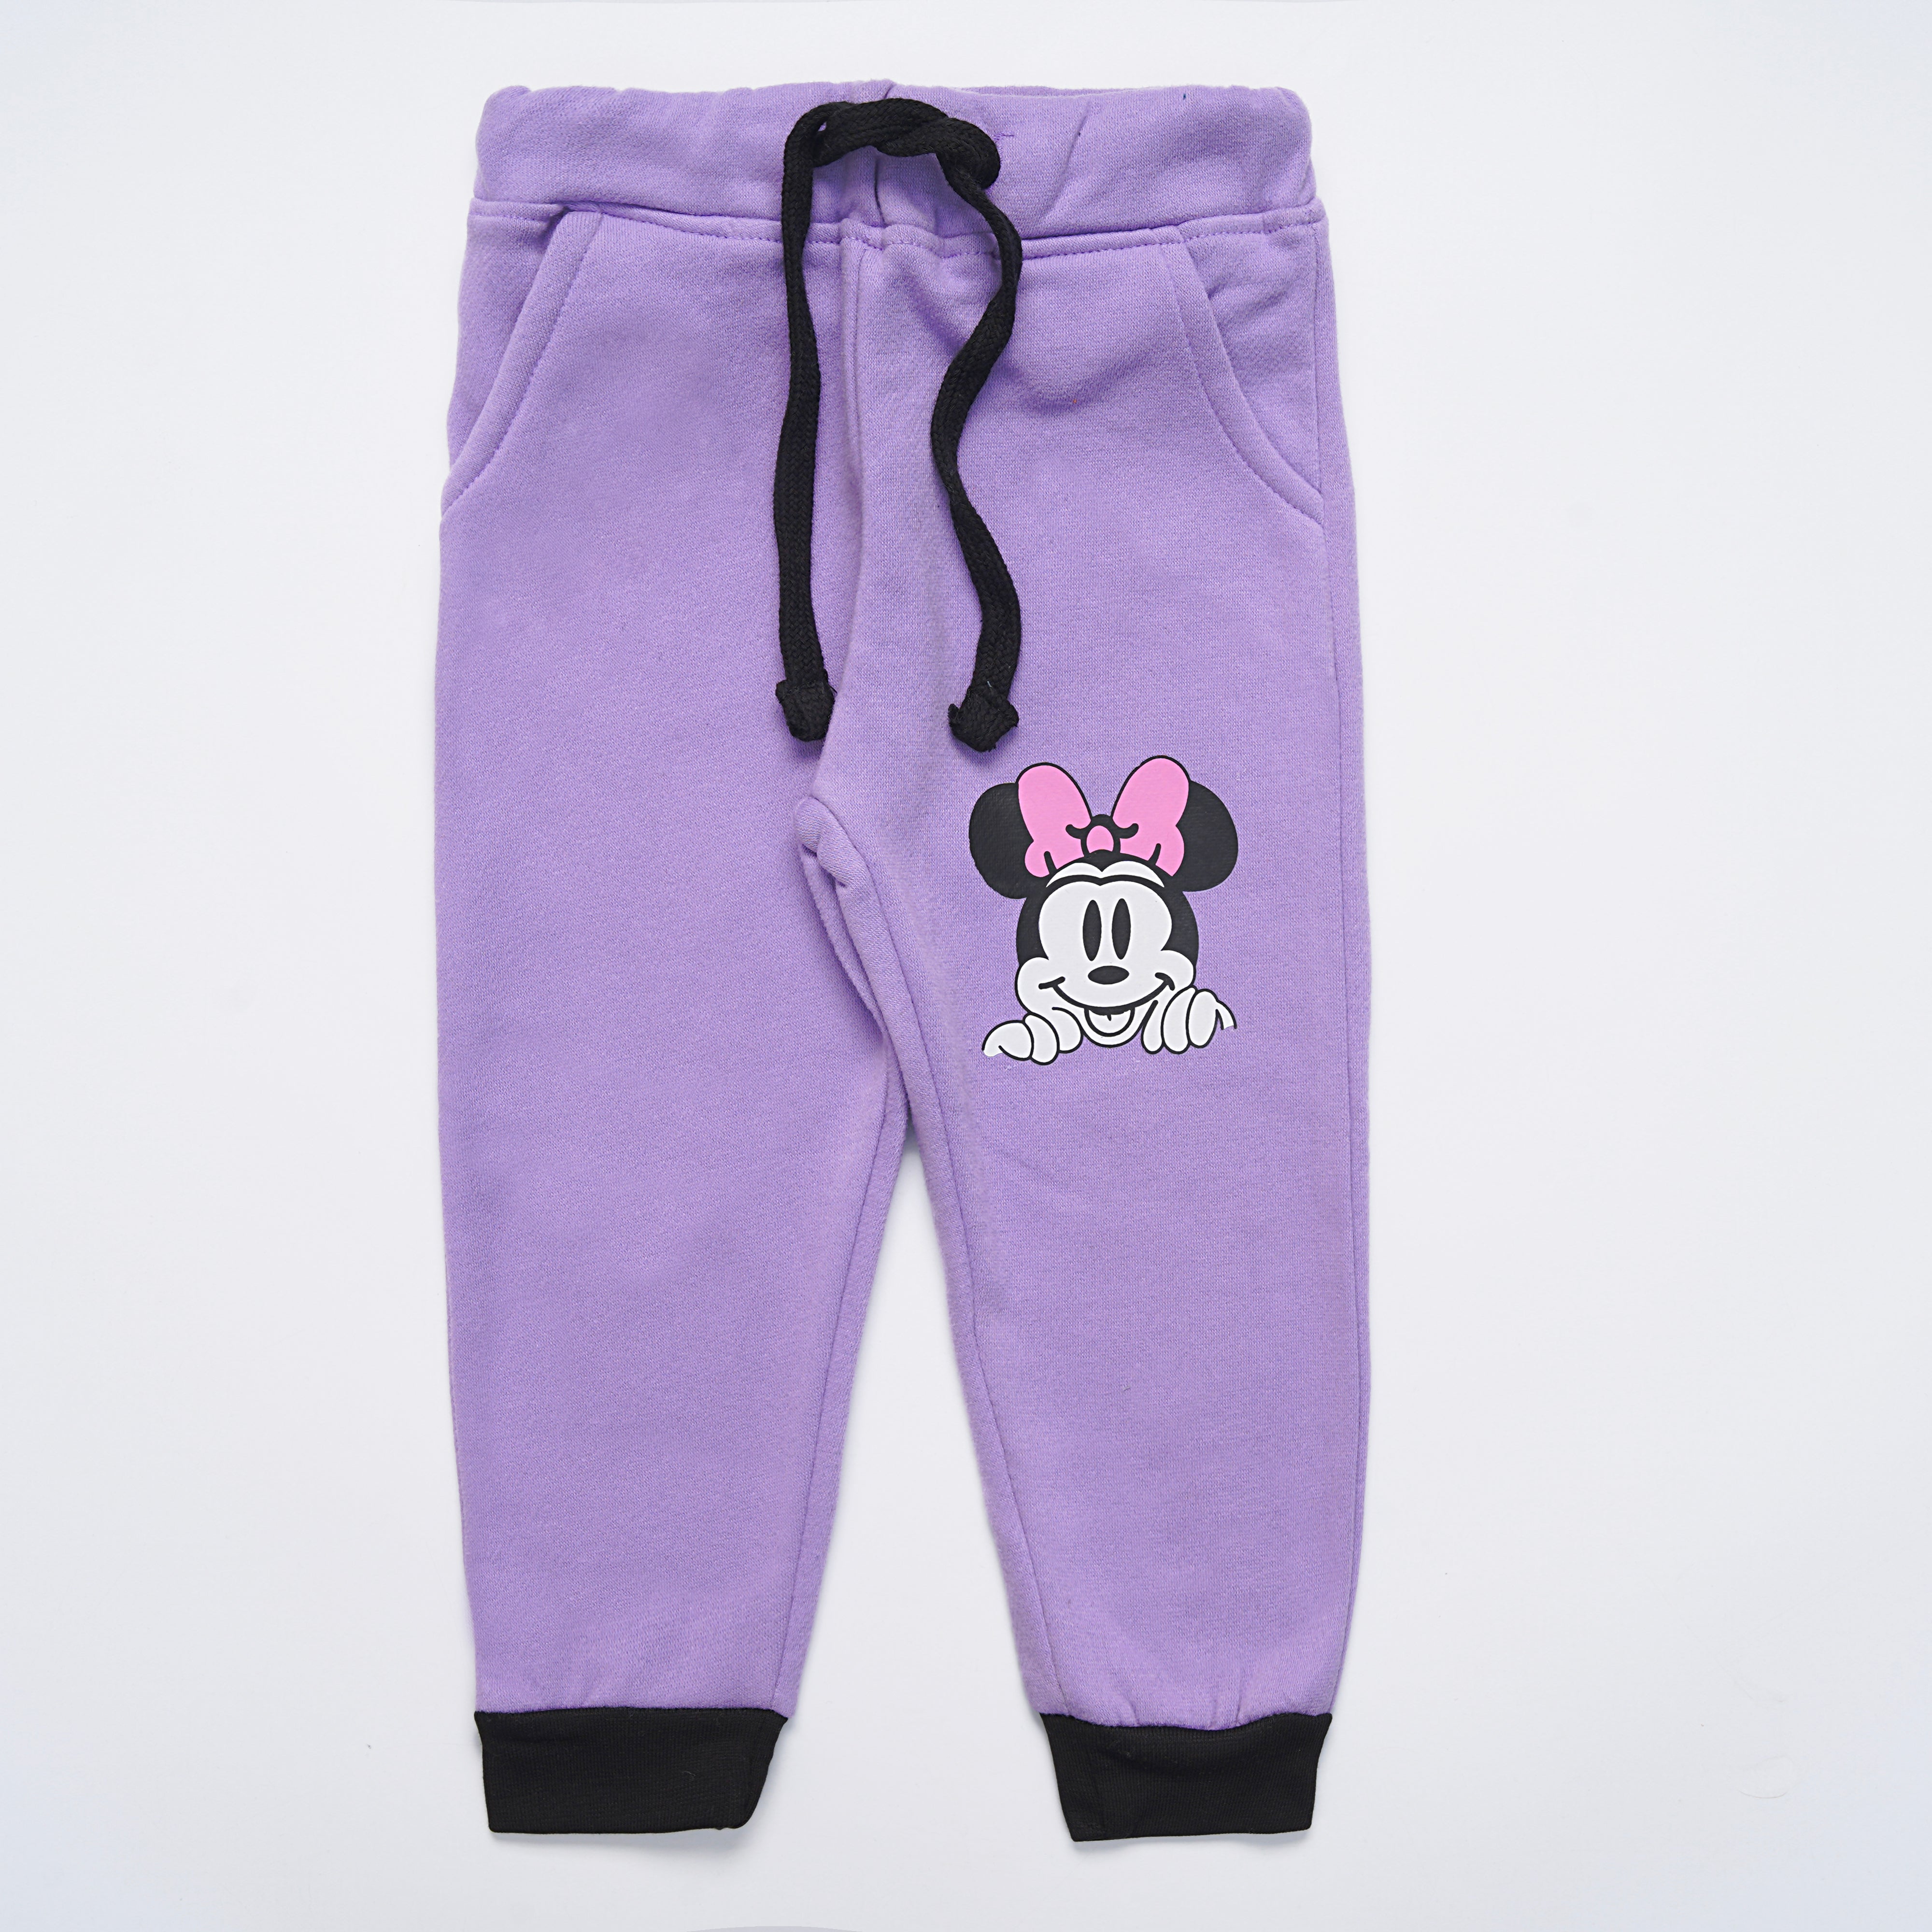 Infant Baba Trouser (MIckey)